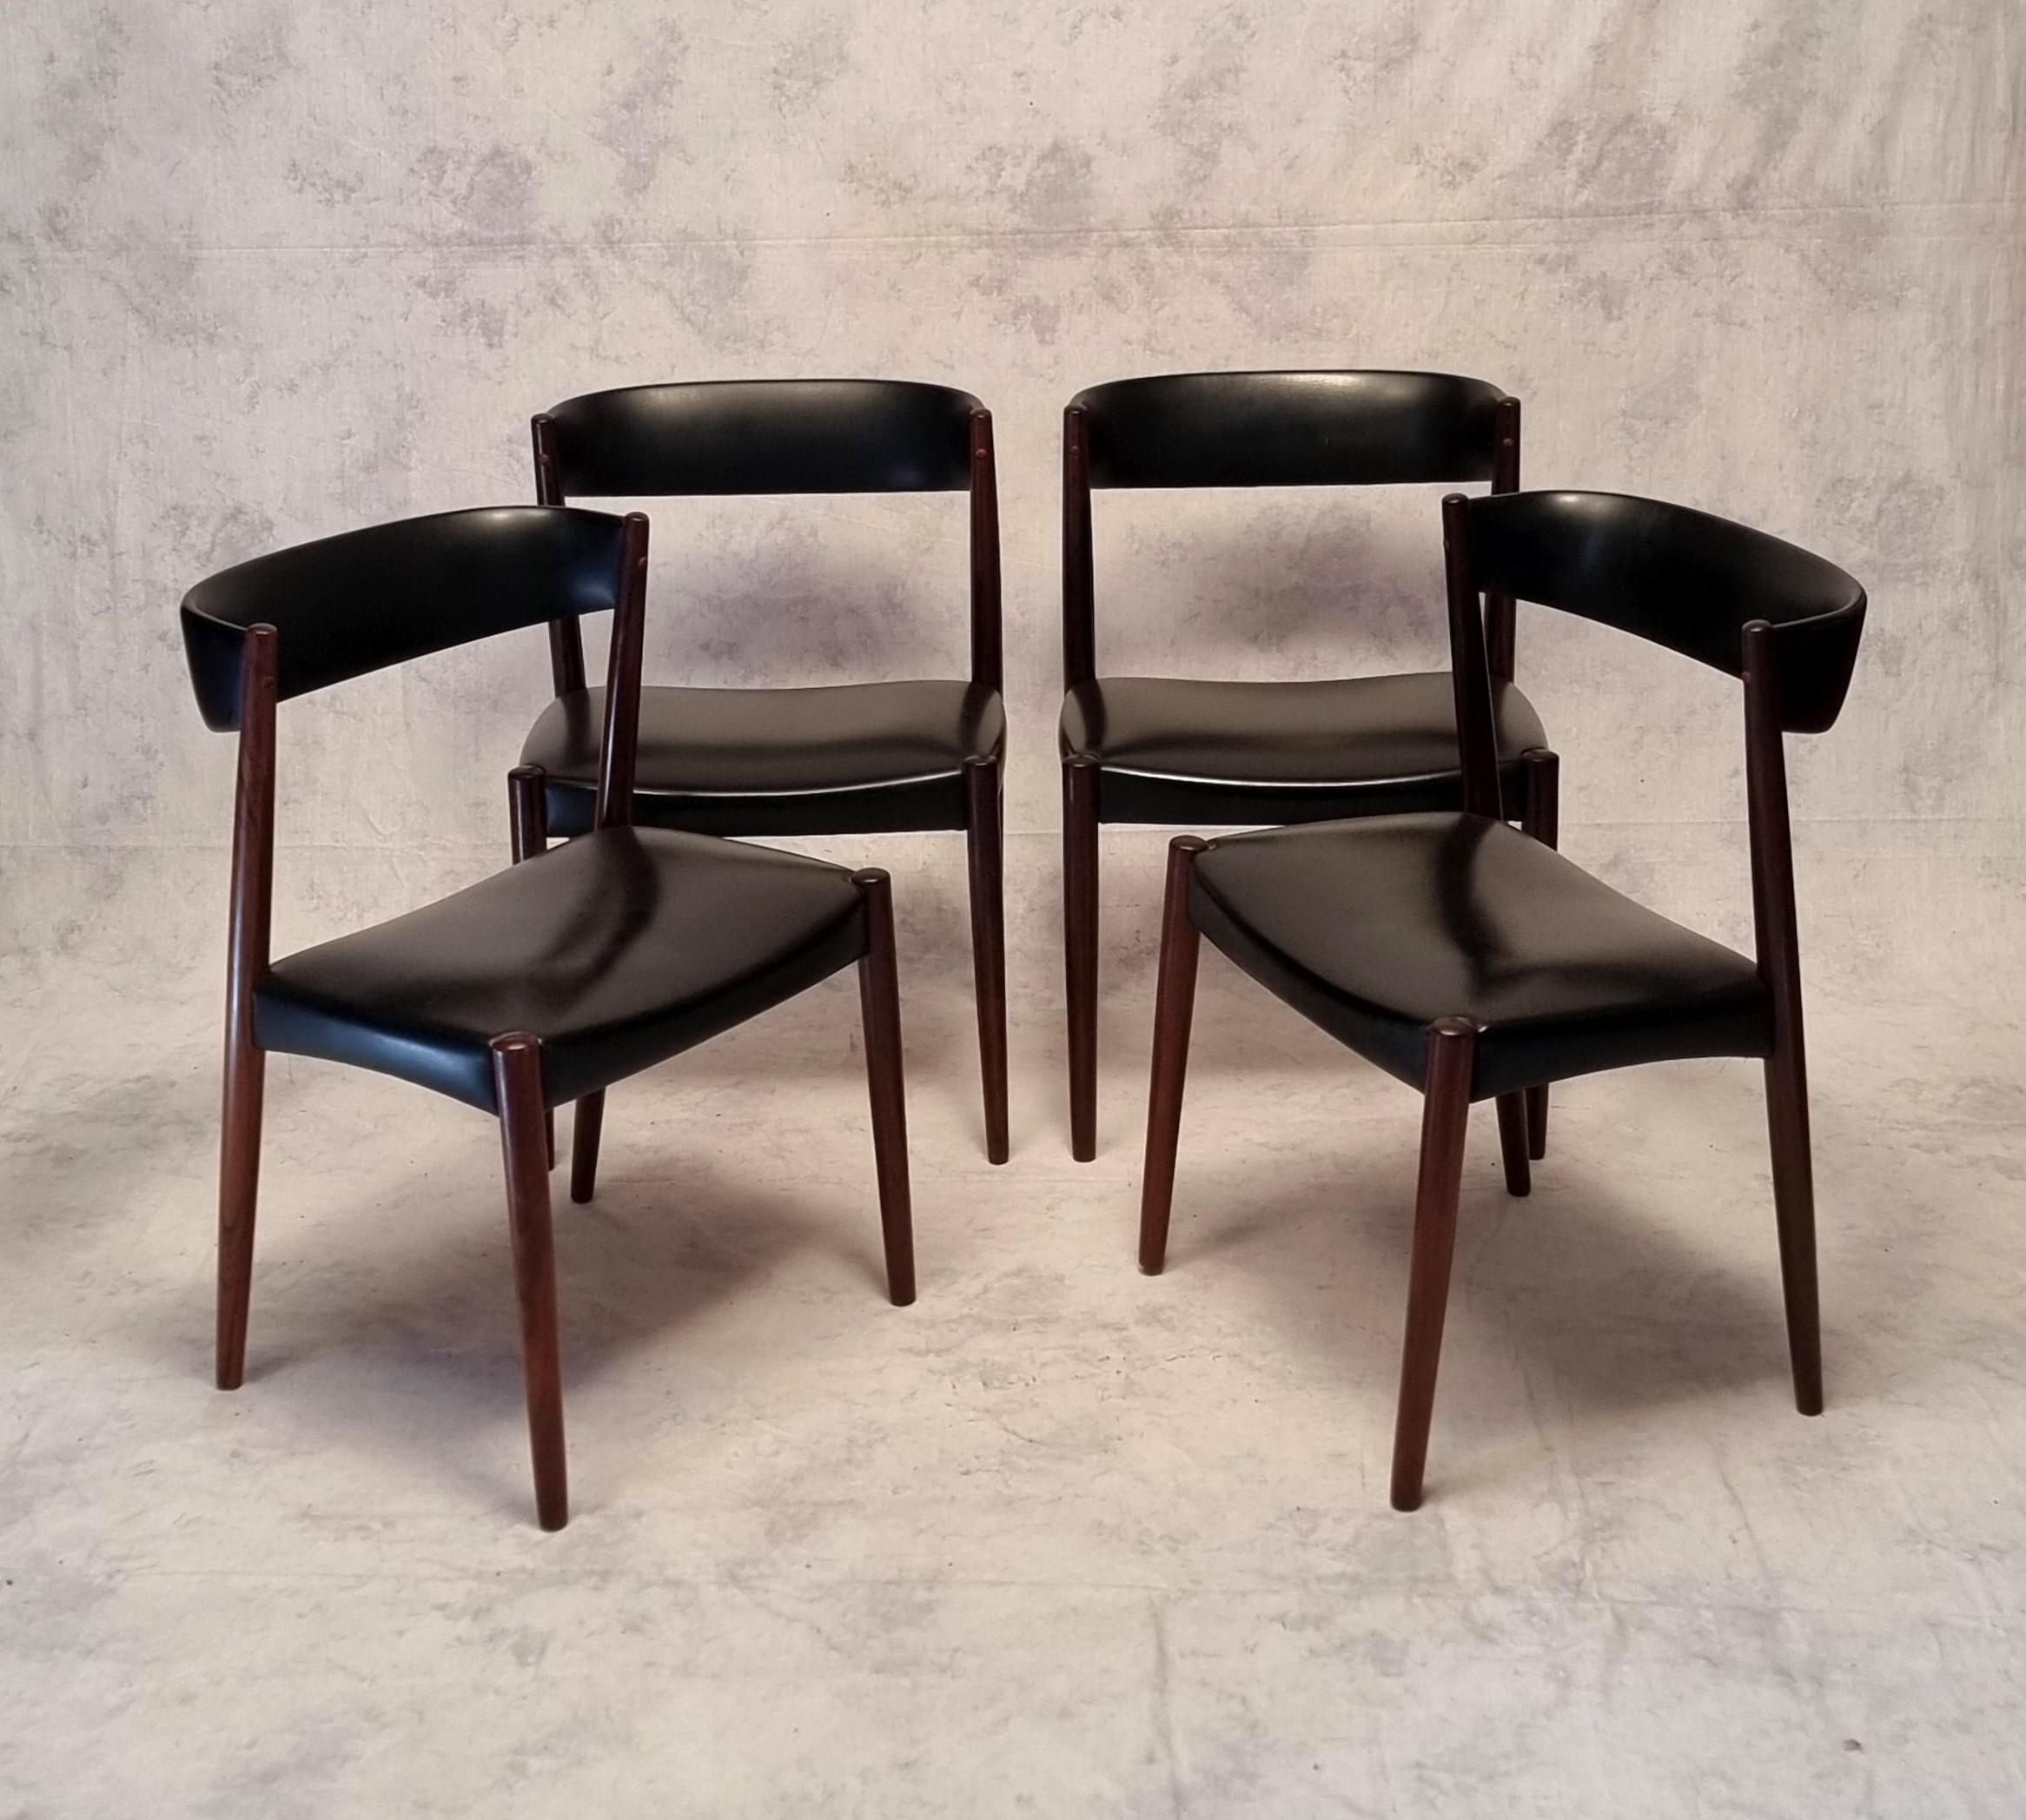 Set of four vintage Scandinavian chairs produced by Vejle Mobelfabrik in the 1960s. Work in solid Rio rosewood in the spirit of Kai Kristiansen. The veining is magnificent. Dynamic design with the thin shell back, joined by two oblique uprights.